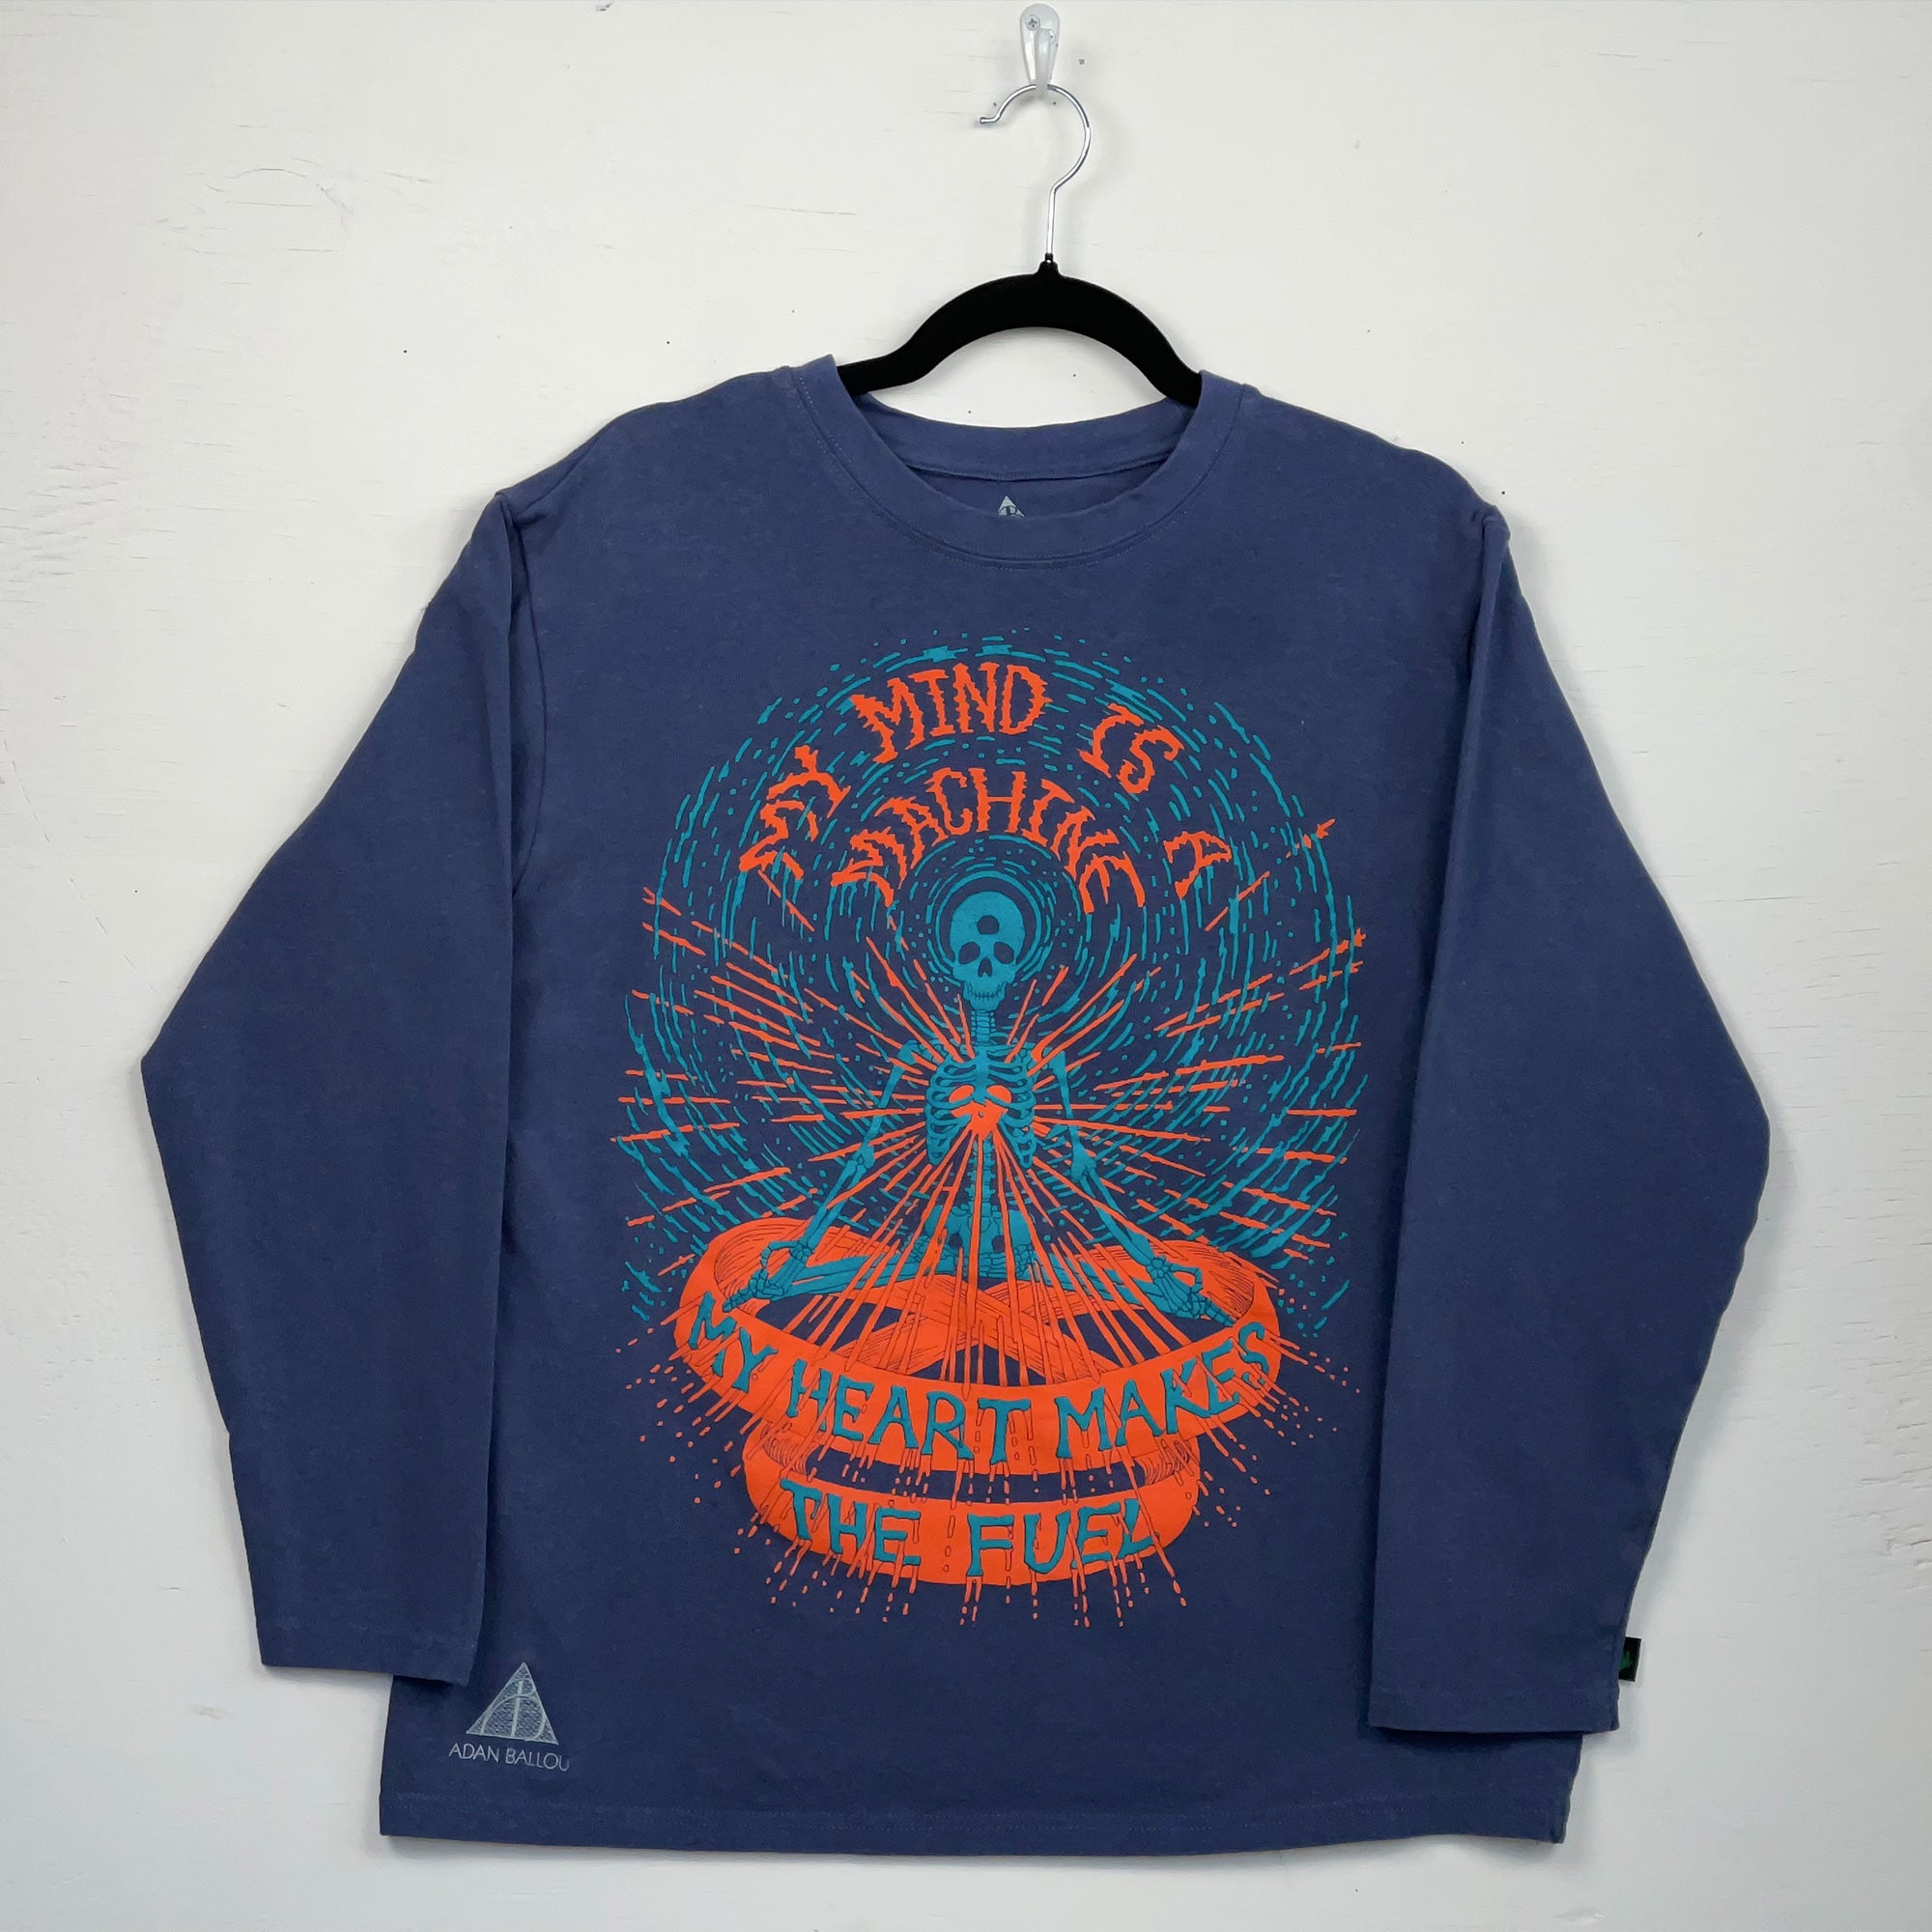 My Mind is a Machine, My Heart Makes the Fuel Navy Long Sleeves